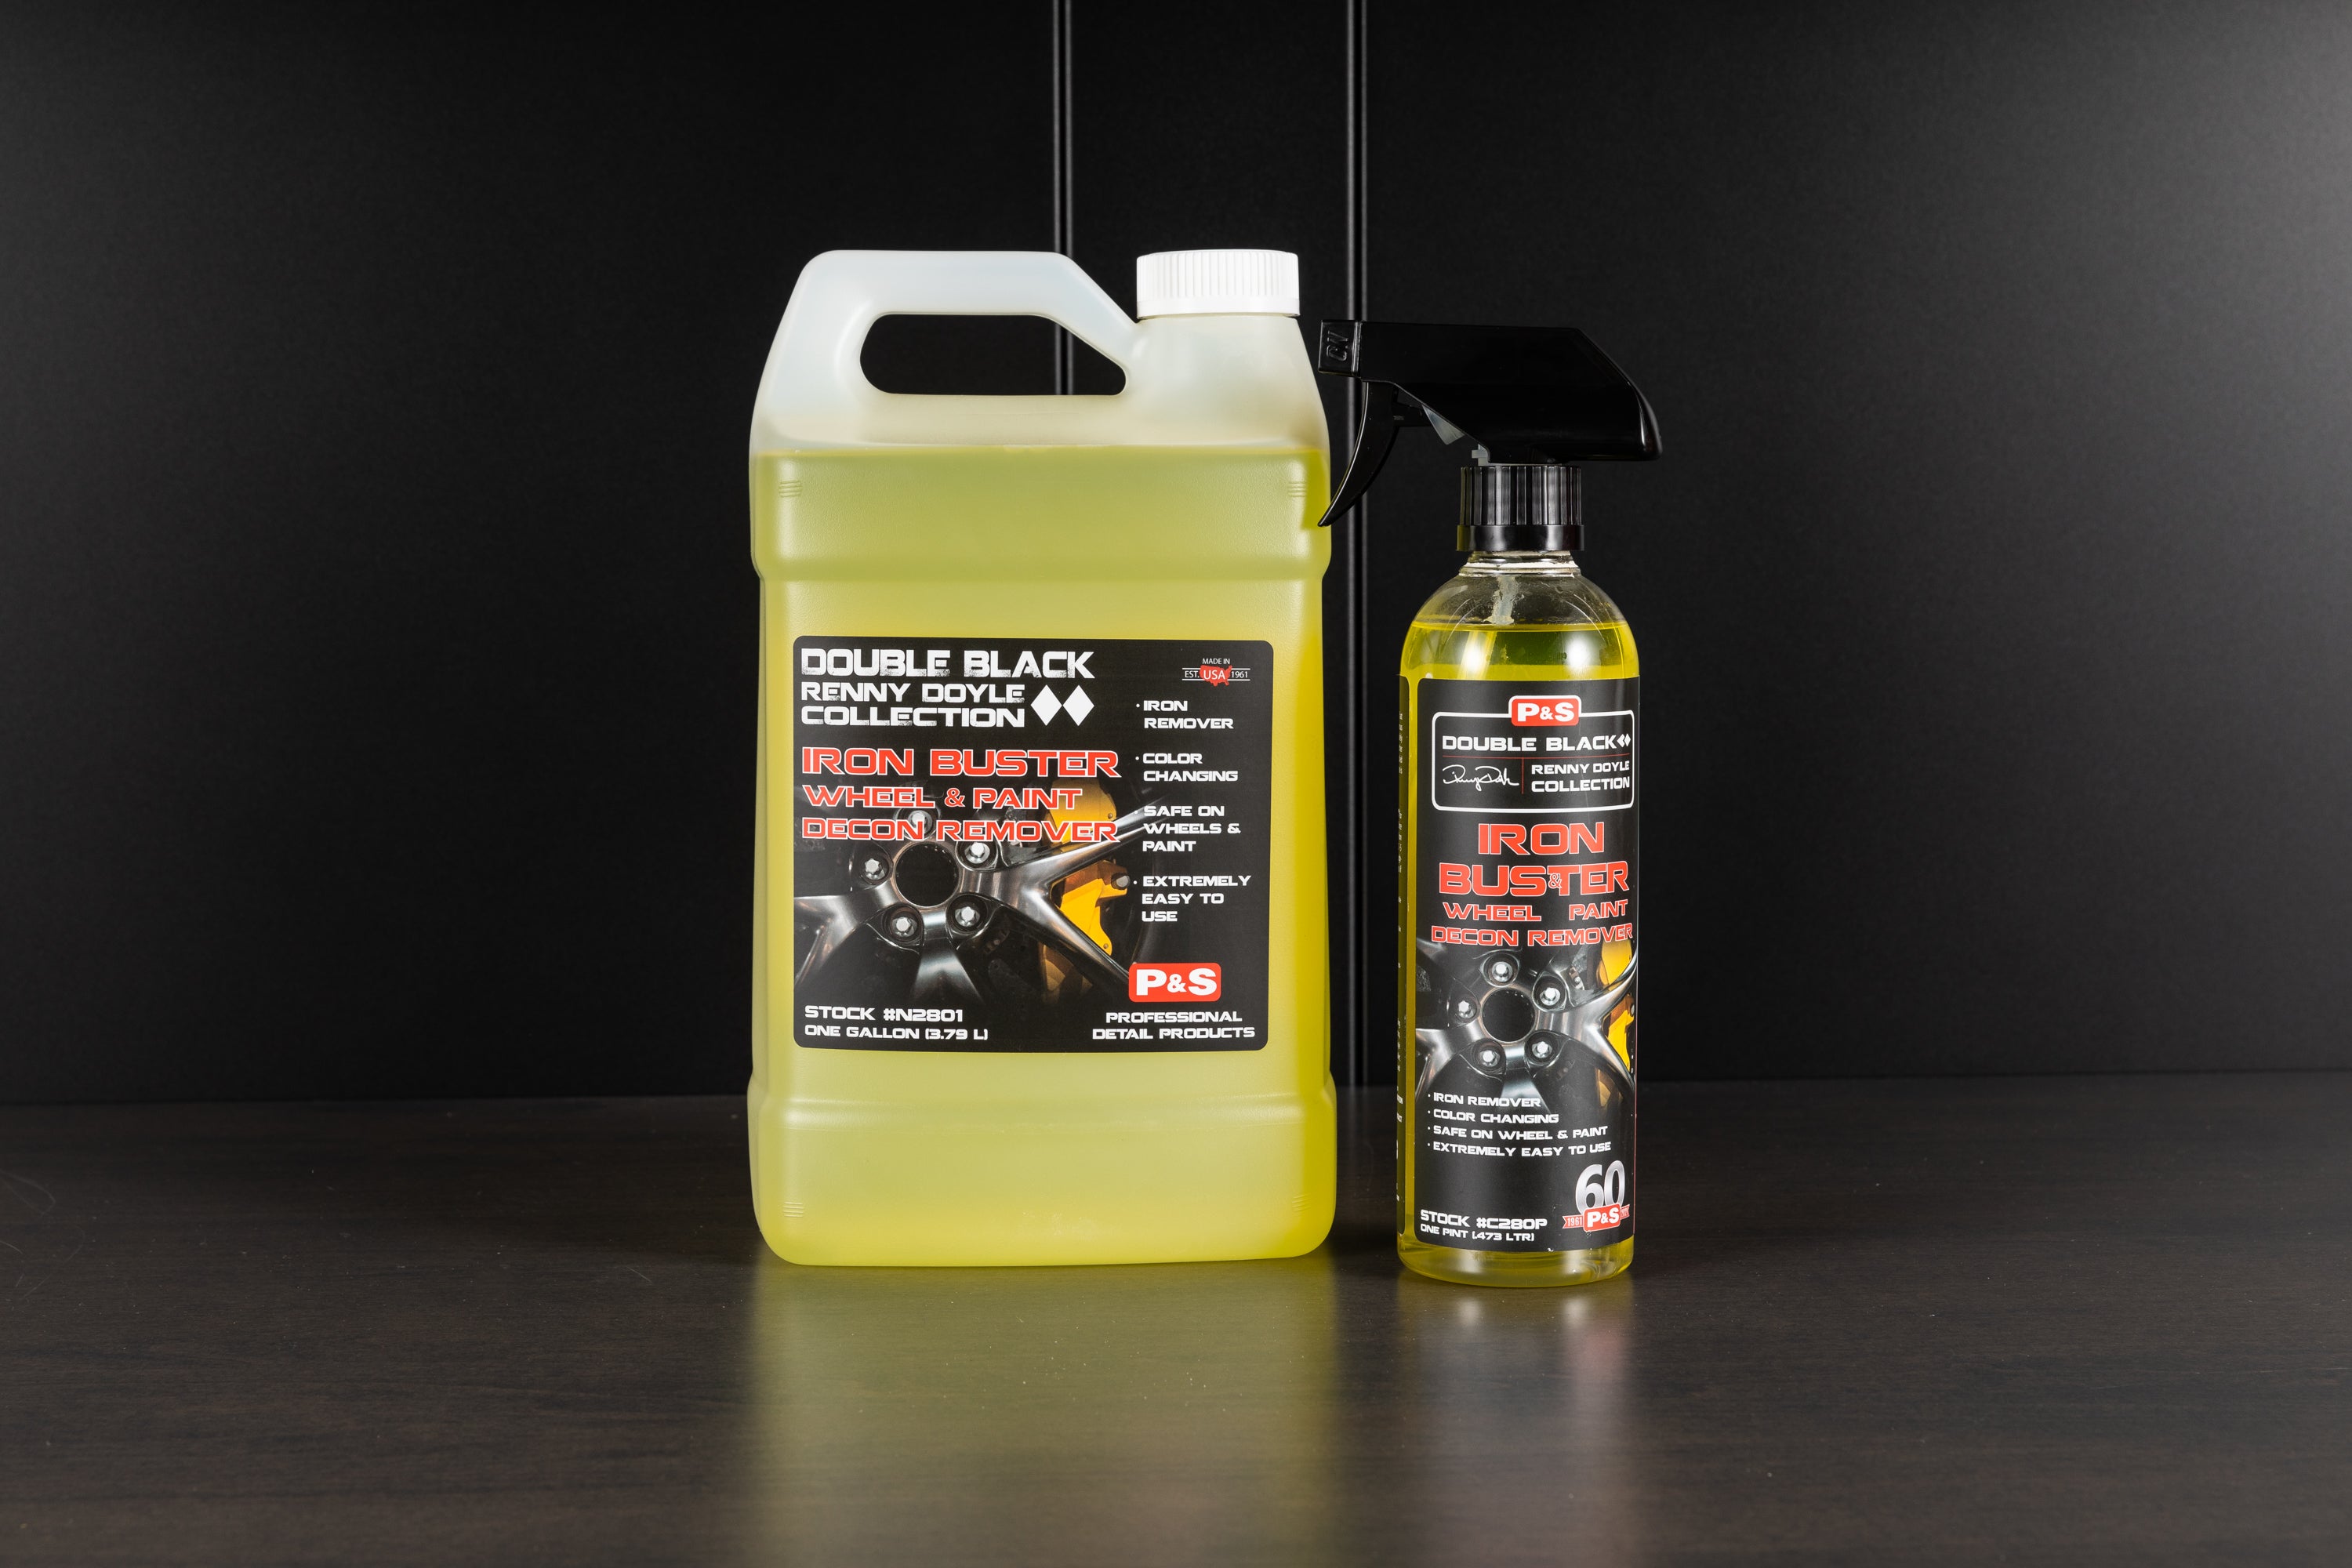 Adam's Iron Remover Car Kit - 16oz for sale online